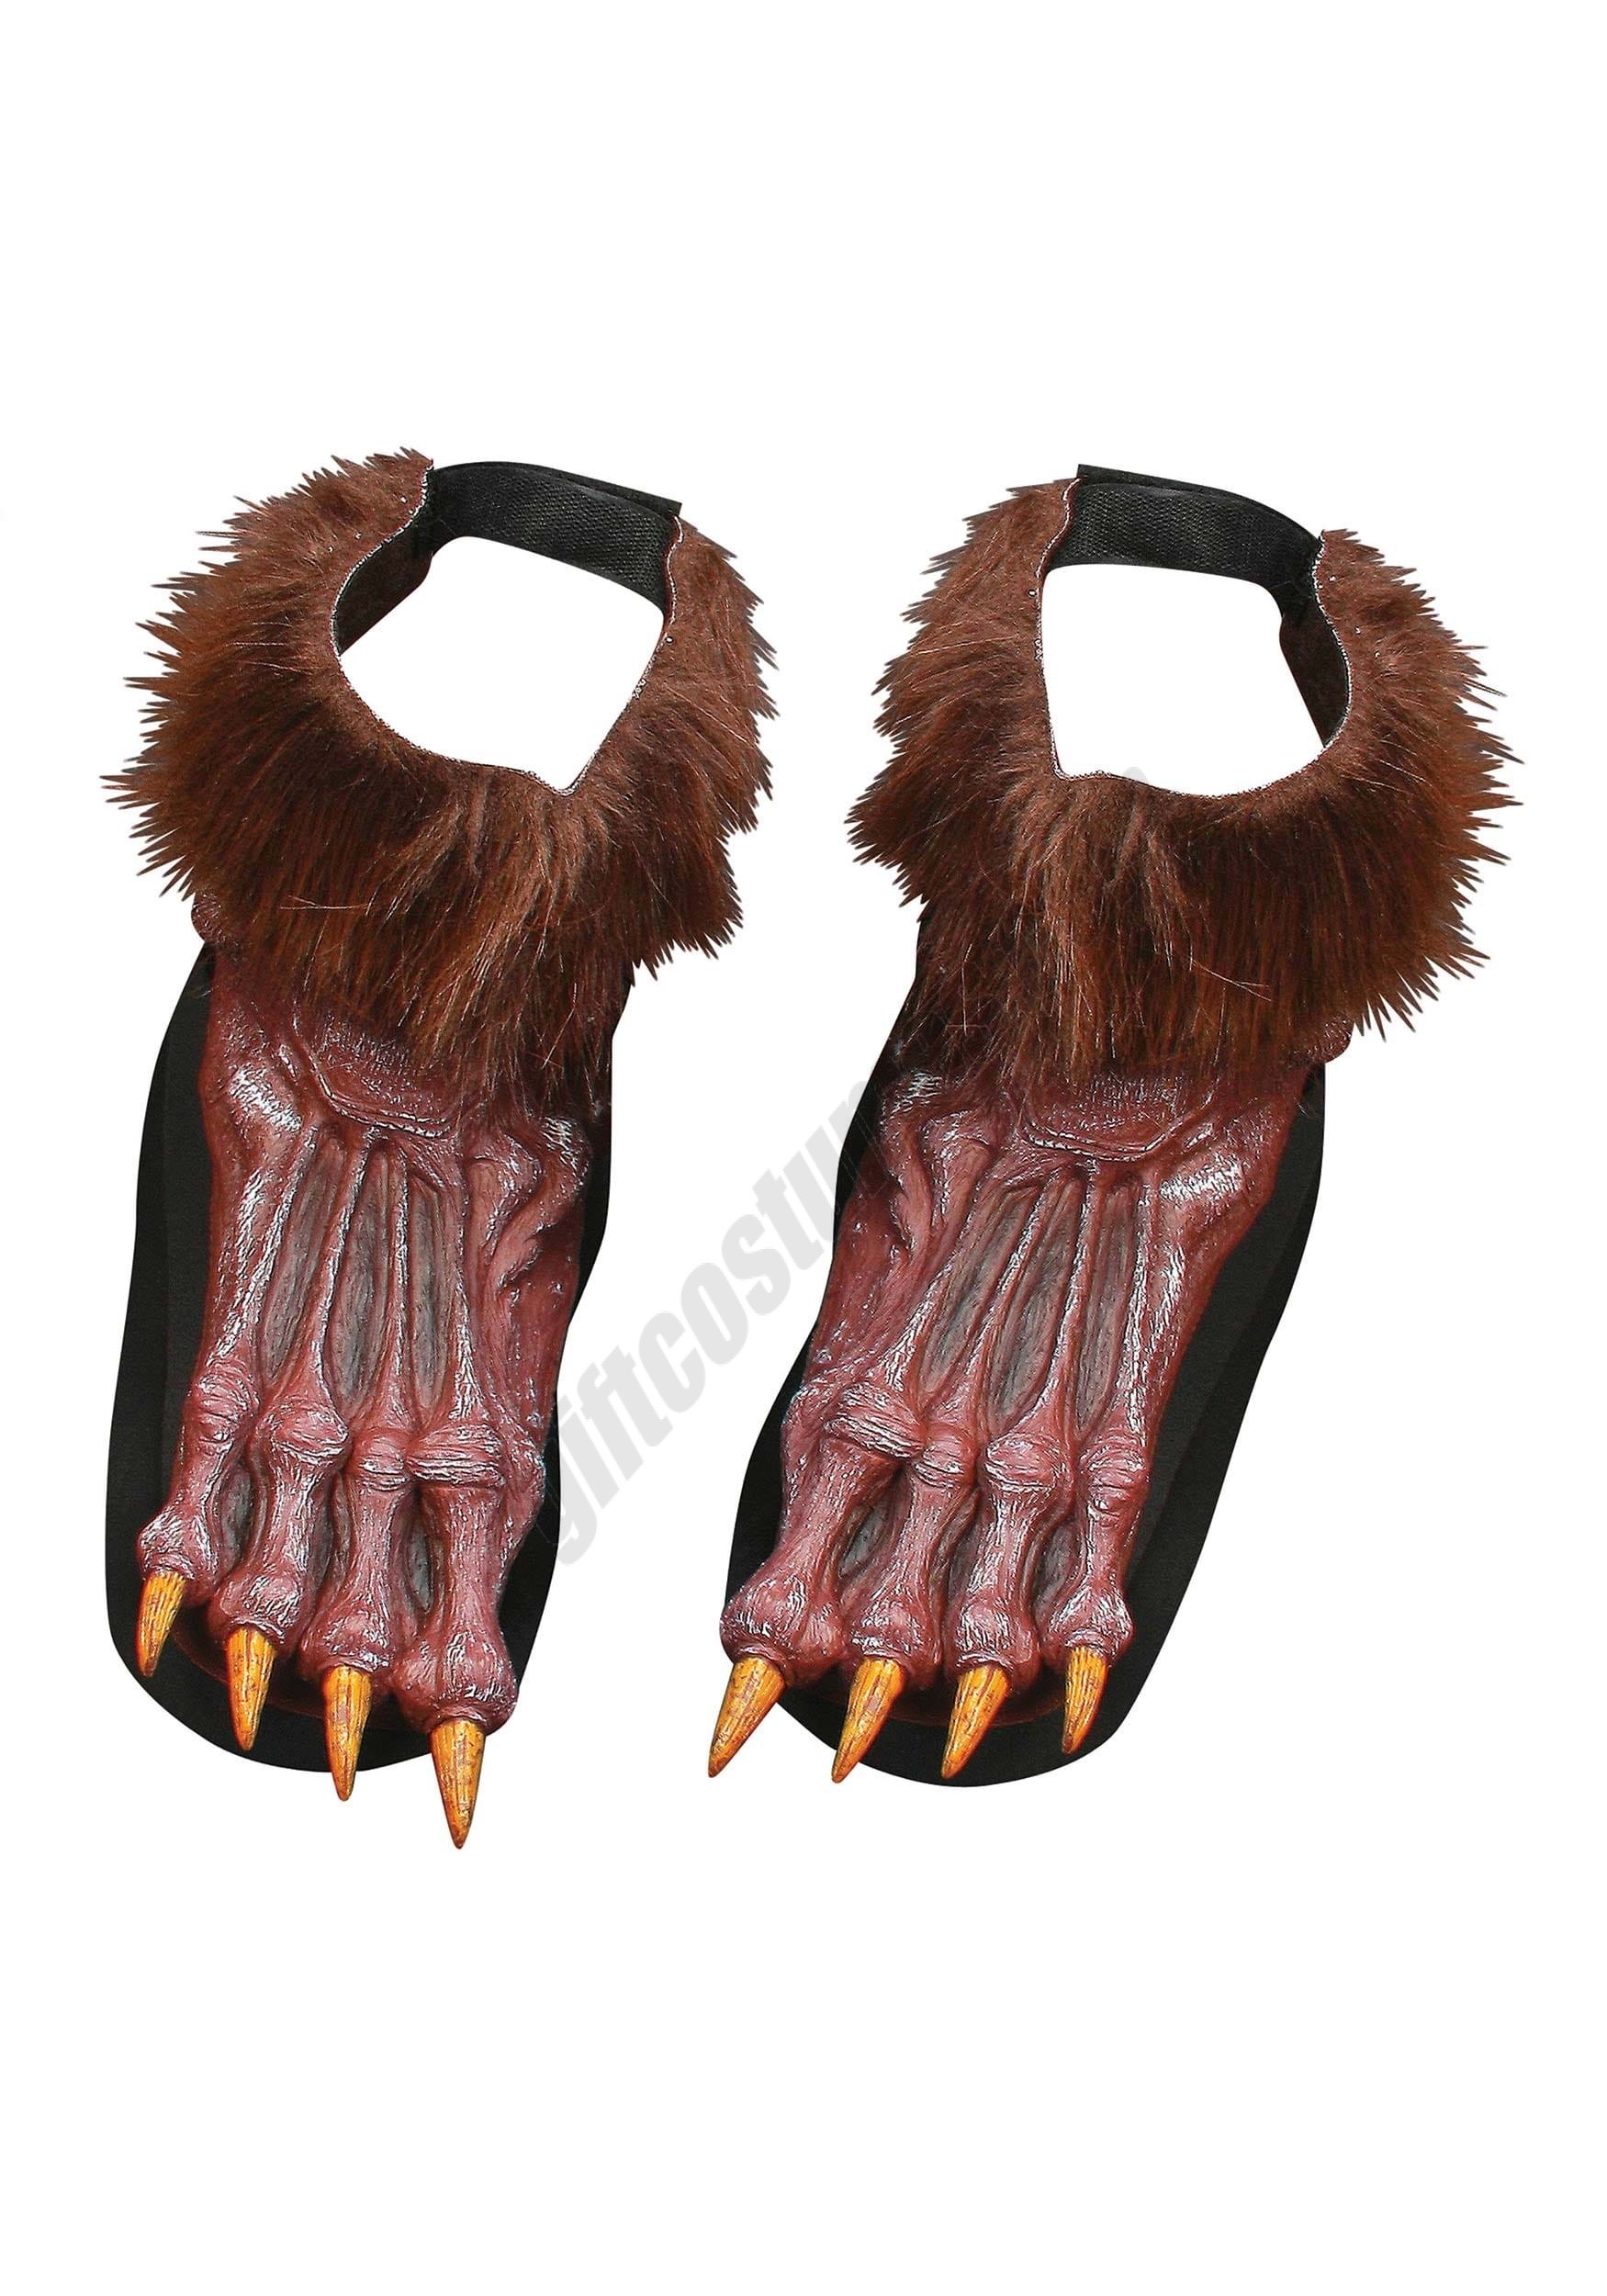 Brown Werewolf Shoe Covers Promotions - Brown Werewolf Shoe Covers Promotions